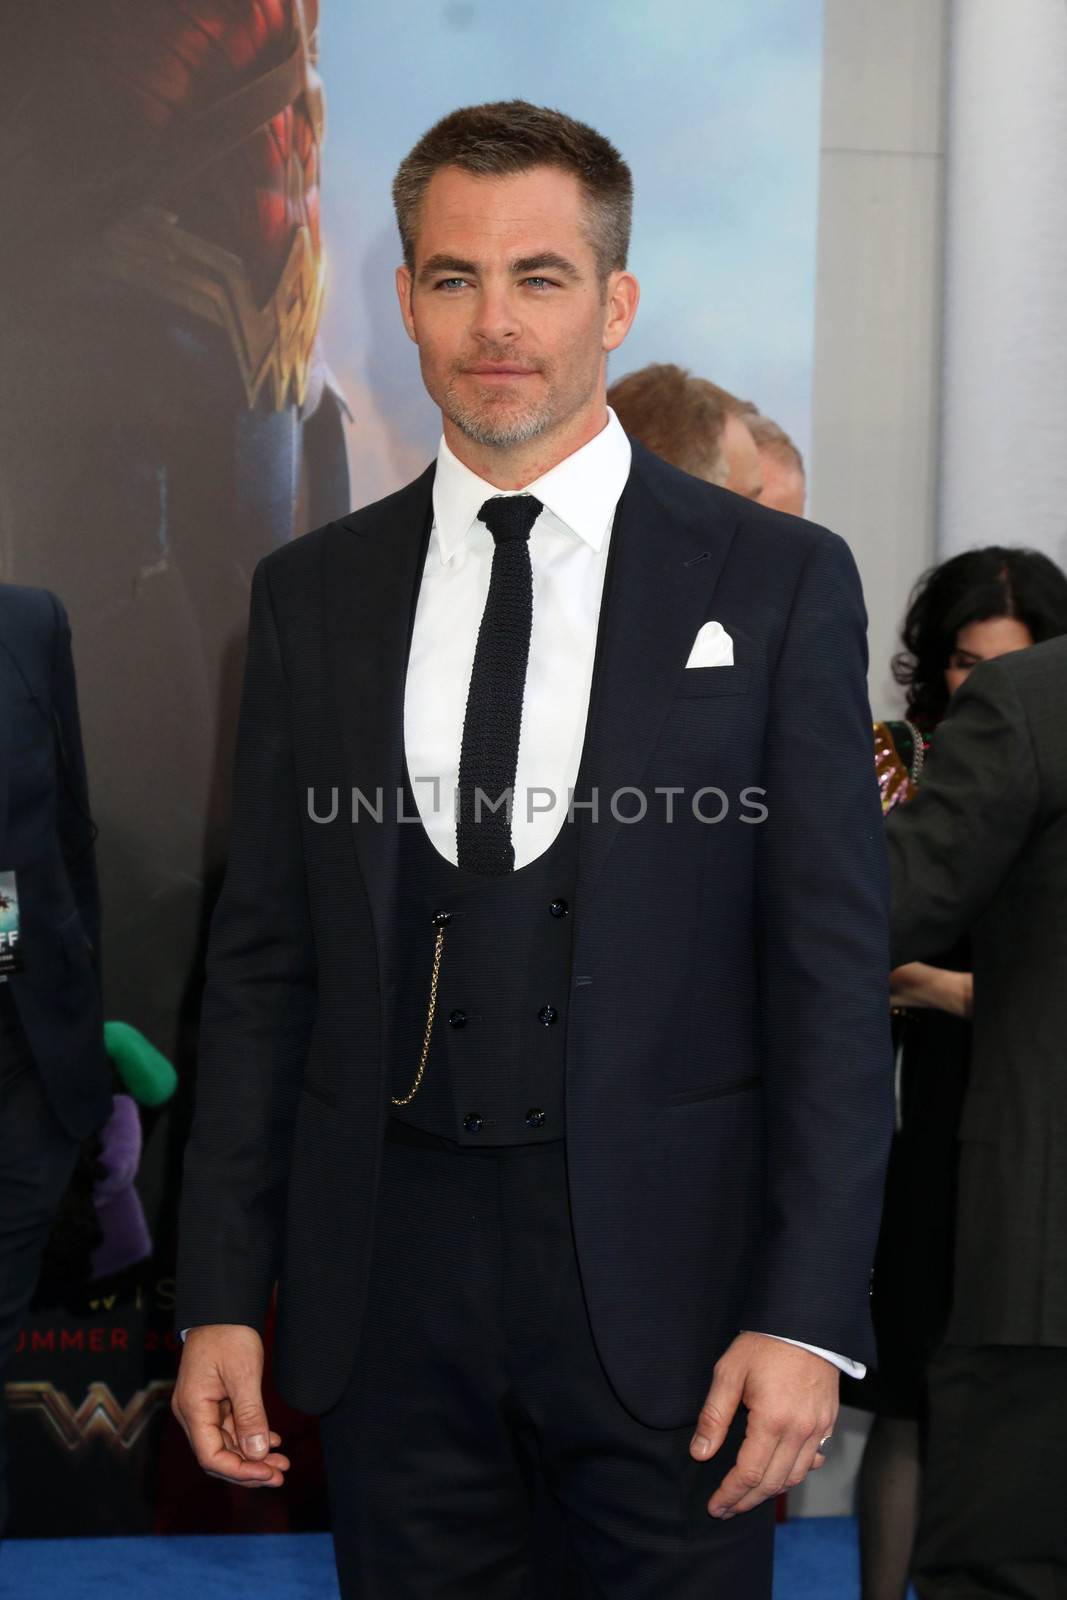 Chris Pine
at the "Wonder Woman" Premiere, Pantages, Hollywood, CA 05-25-17/ImageCollect by ImageCollect